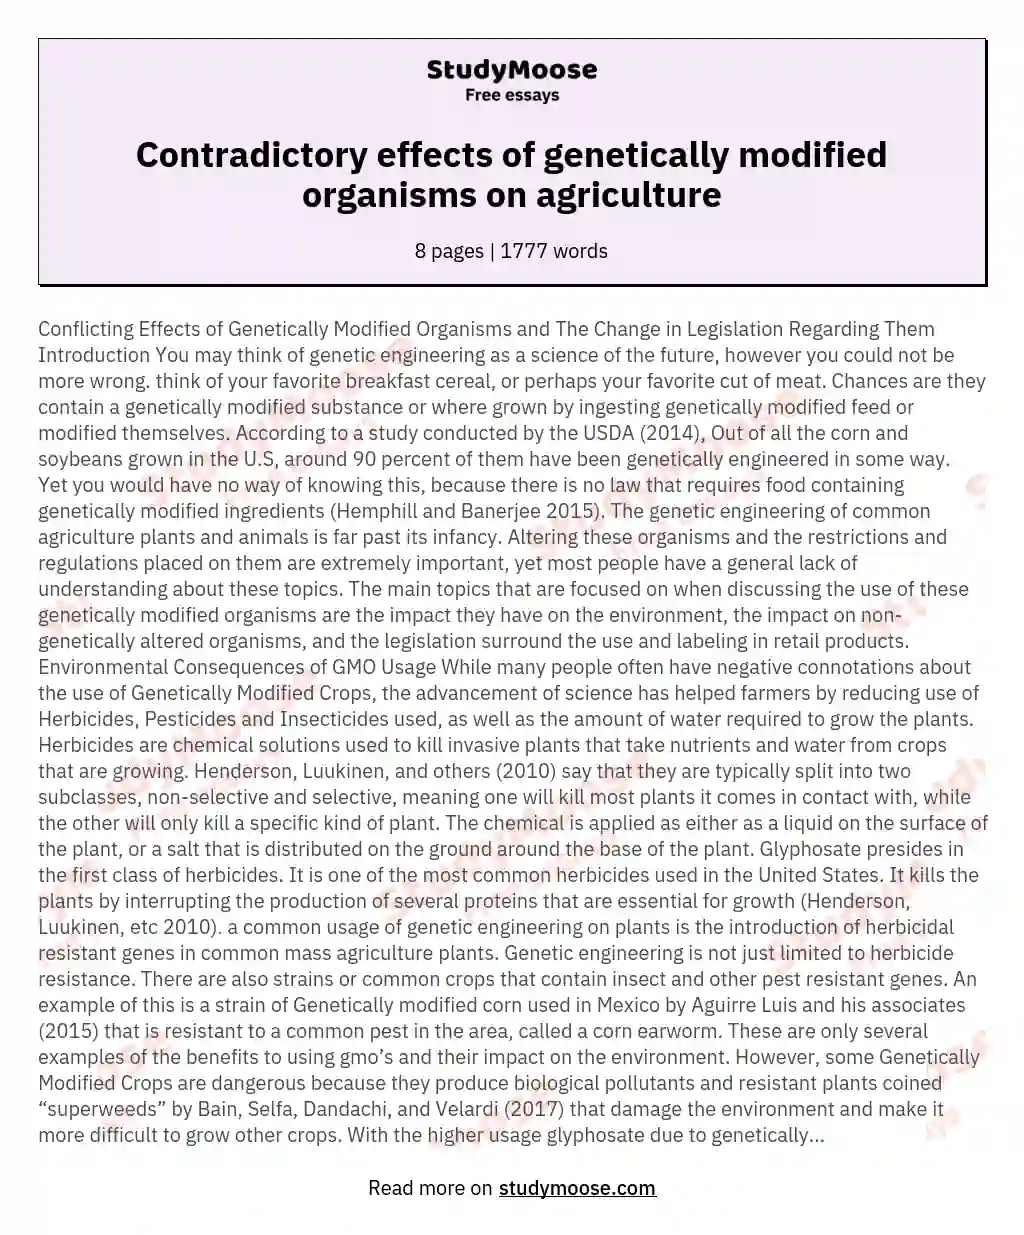 Contradictory effects of genetically modified organisms on agriculture essay